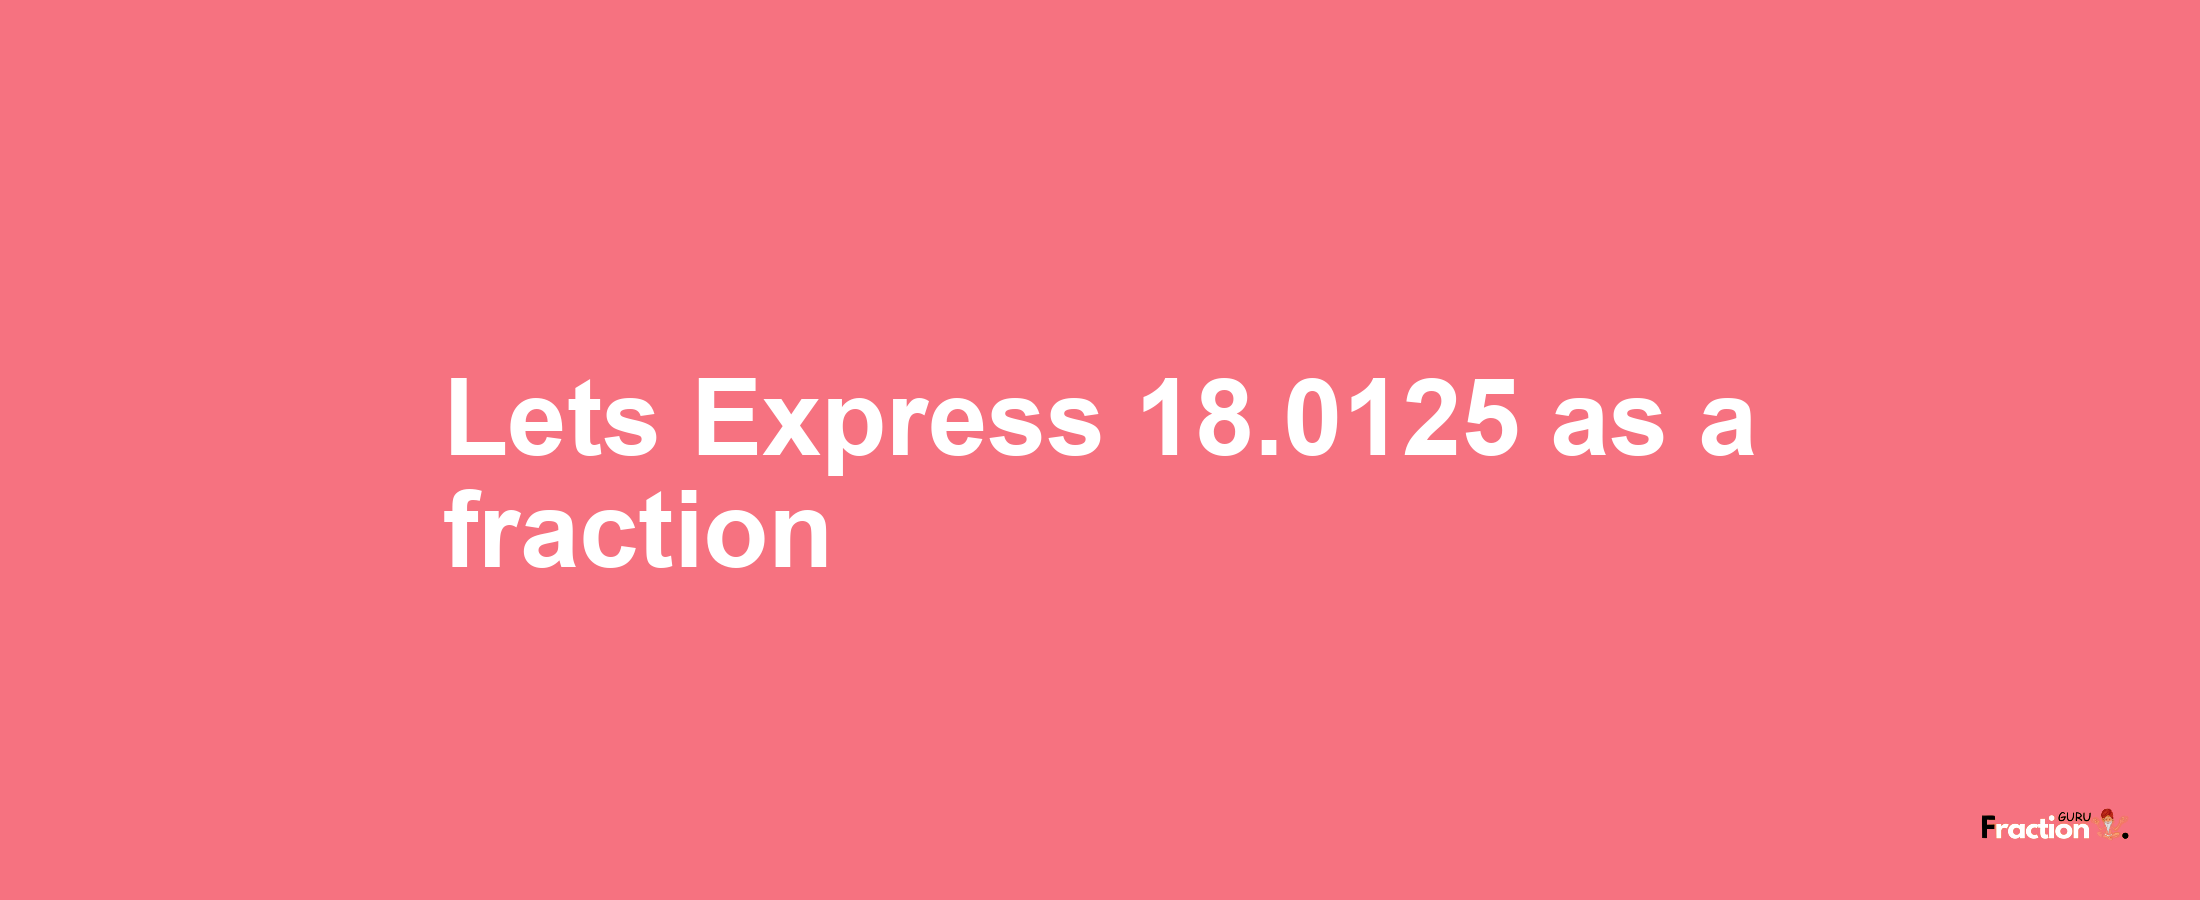 Lets Express 18.0125 as afraction